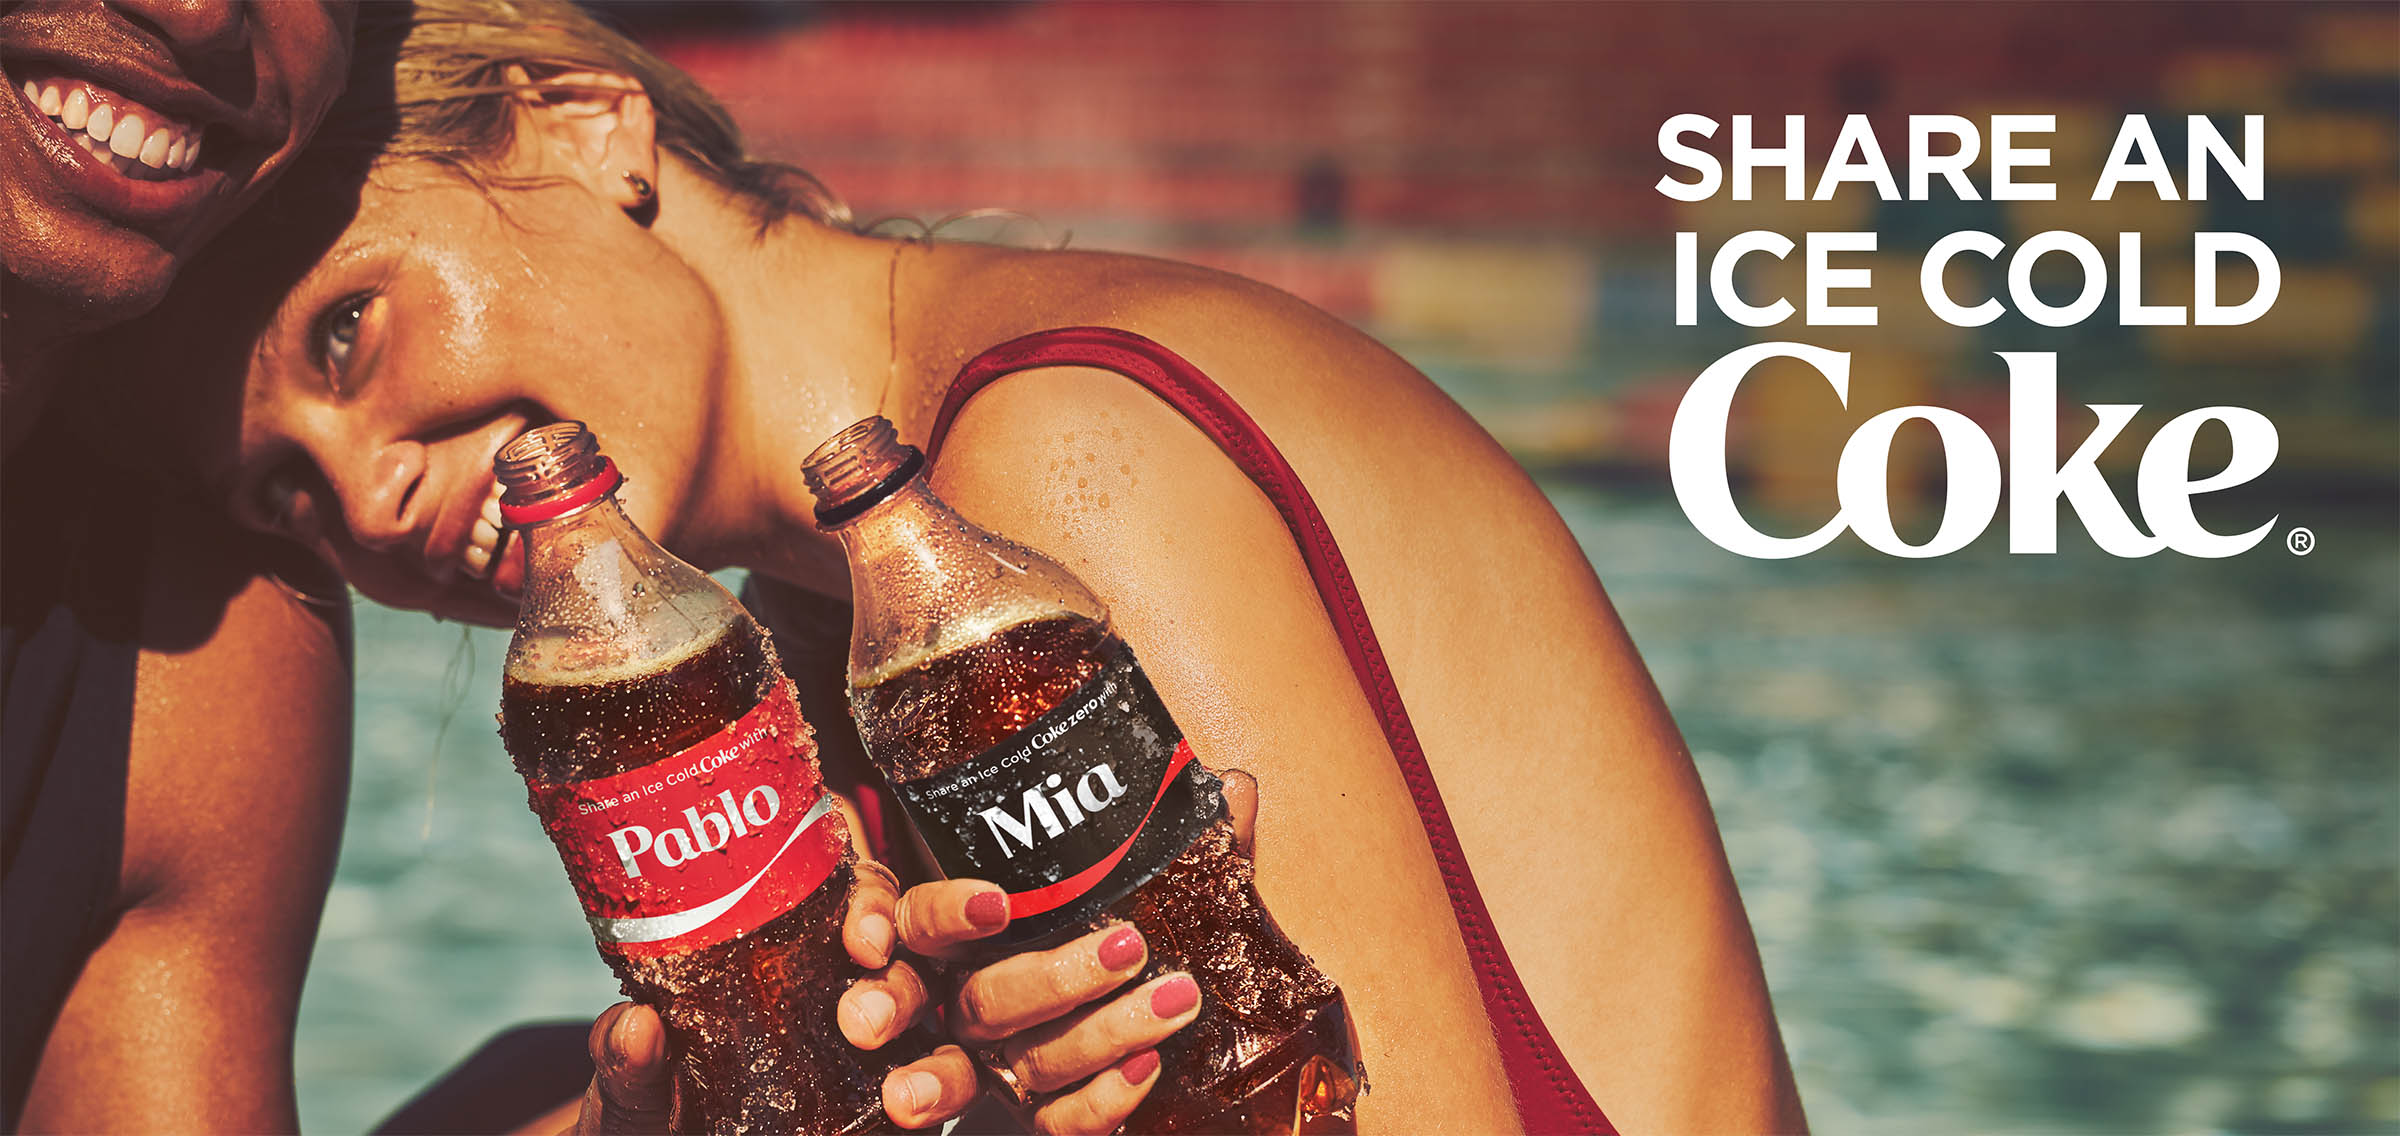 Billboard of teens with Coca-Cola. Says "Share an ice cold Coke".